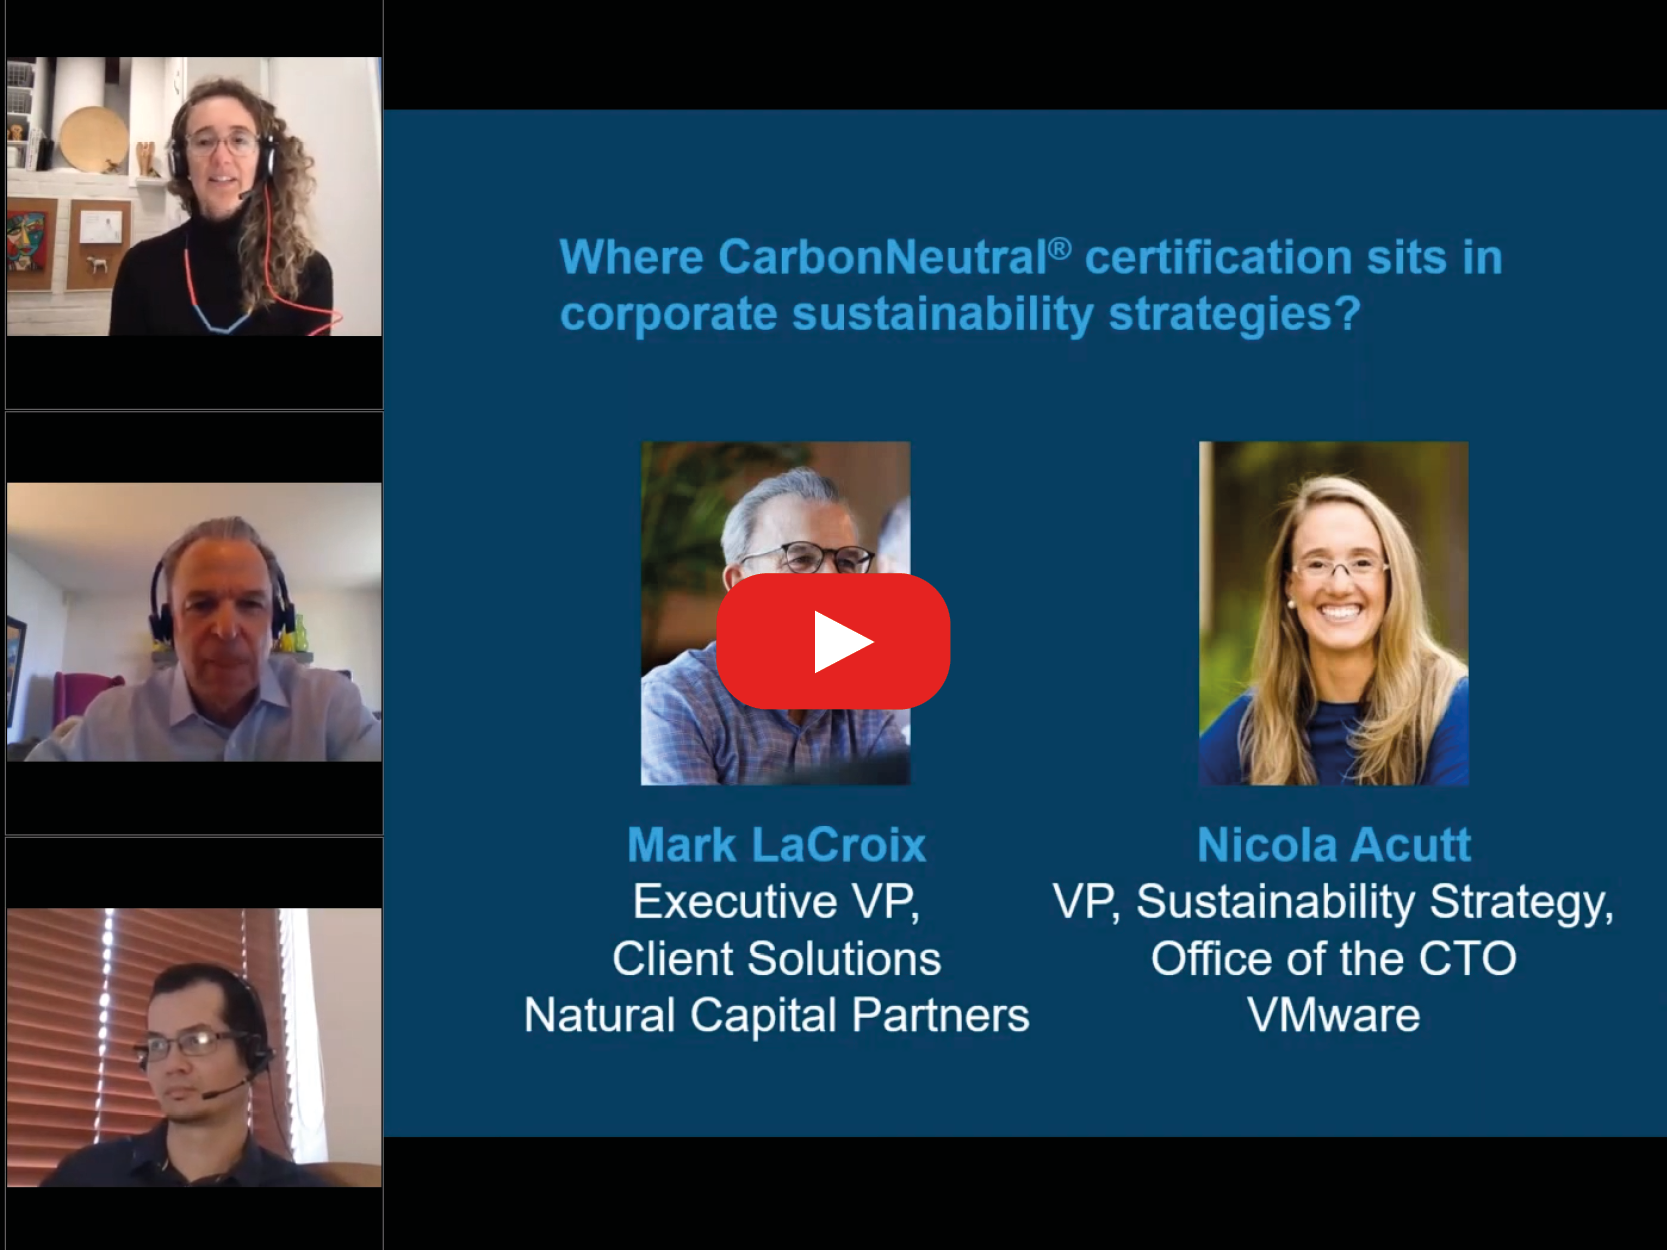 Where CarbonNeutral® certification sits in corporate sustainability strategies